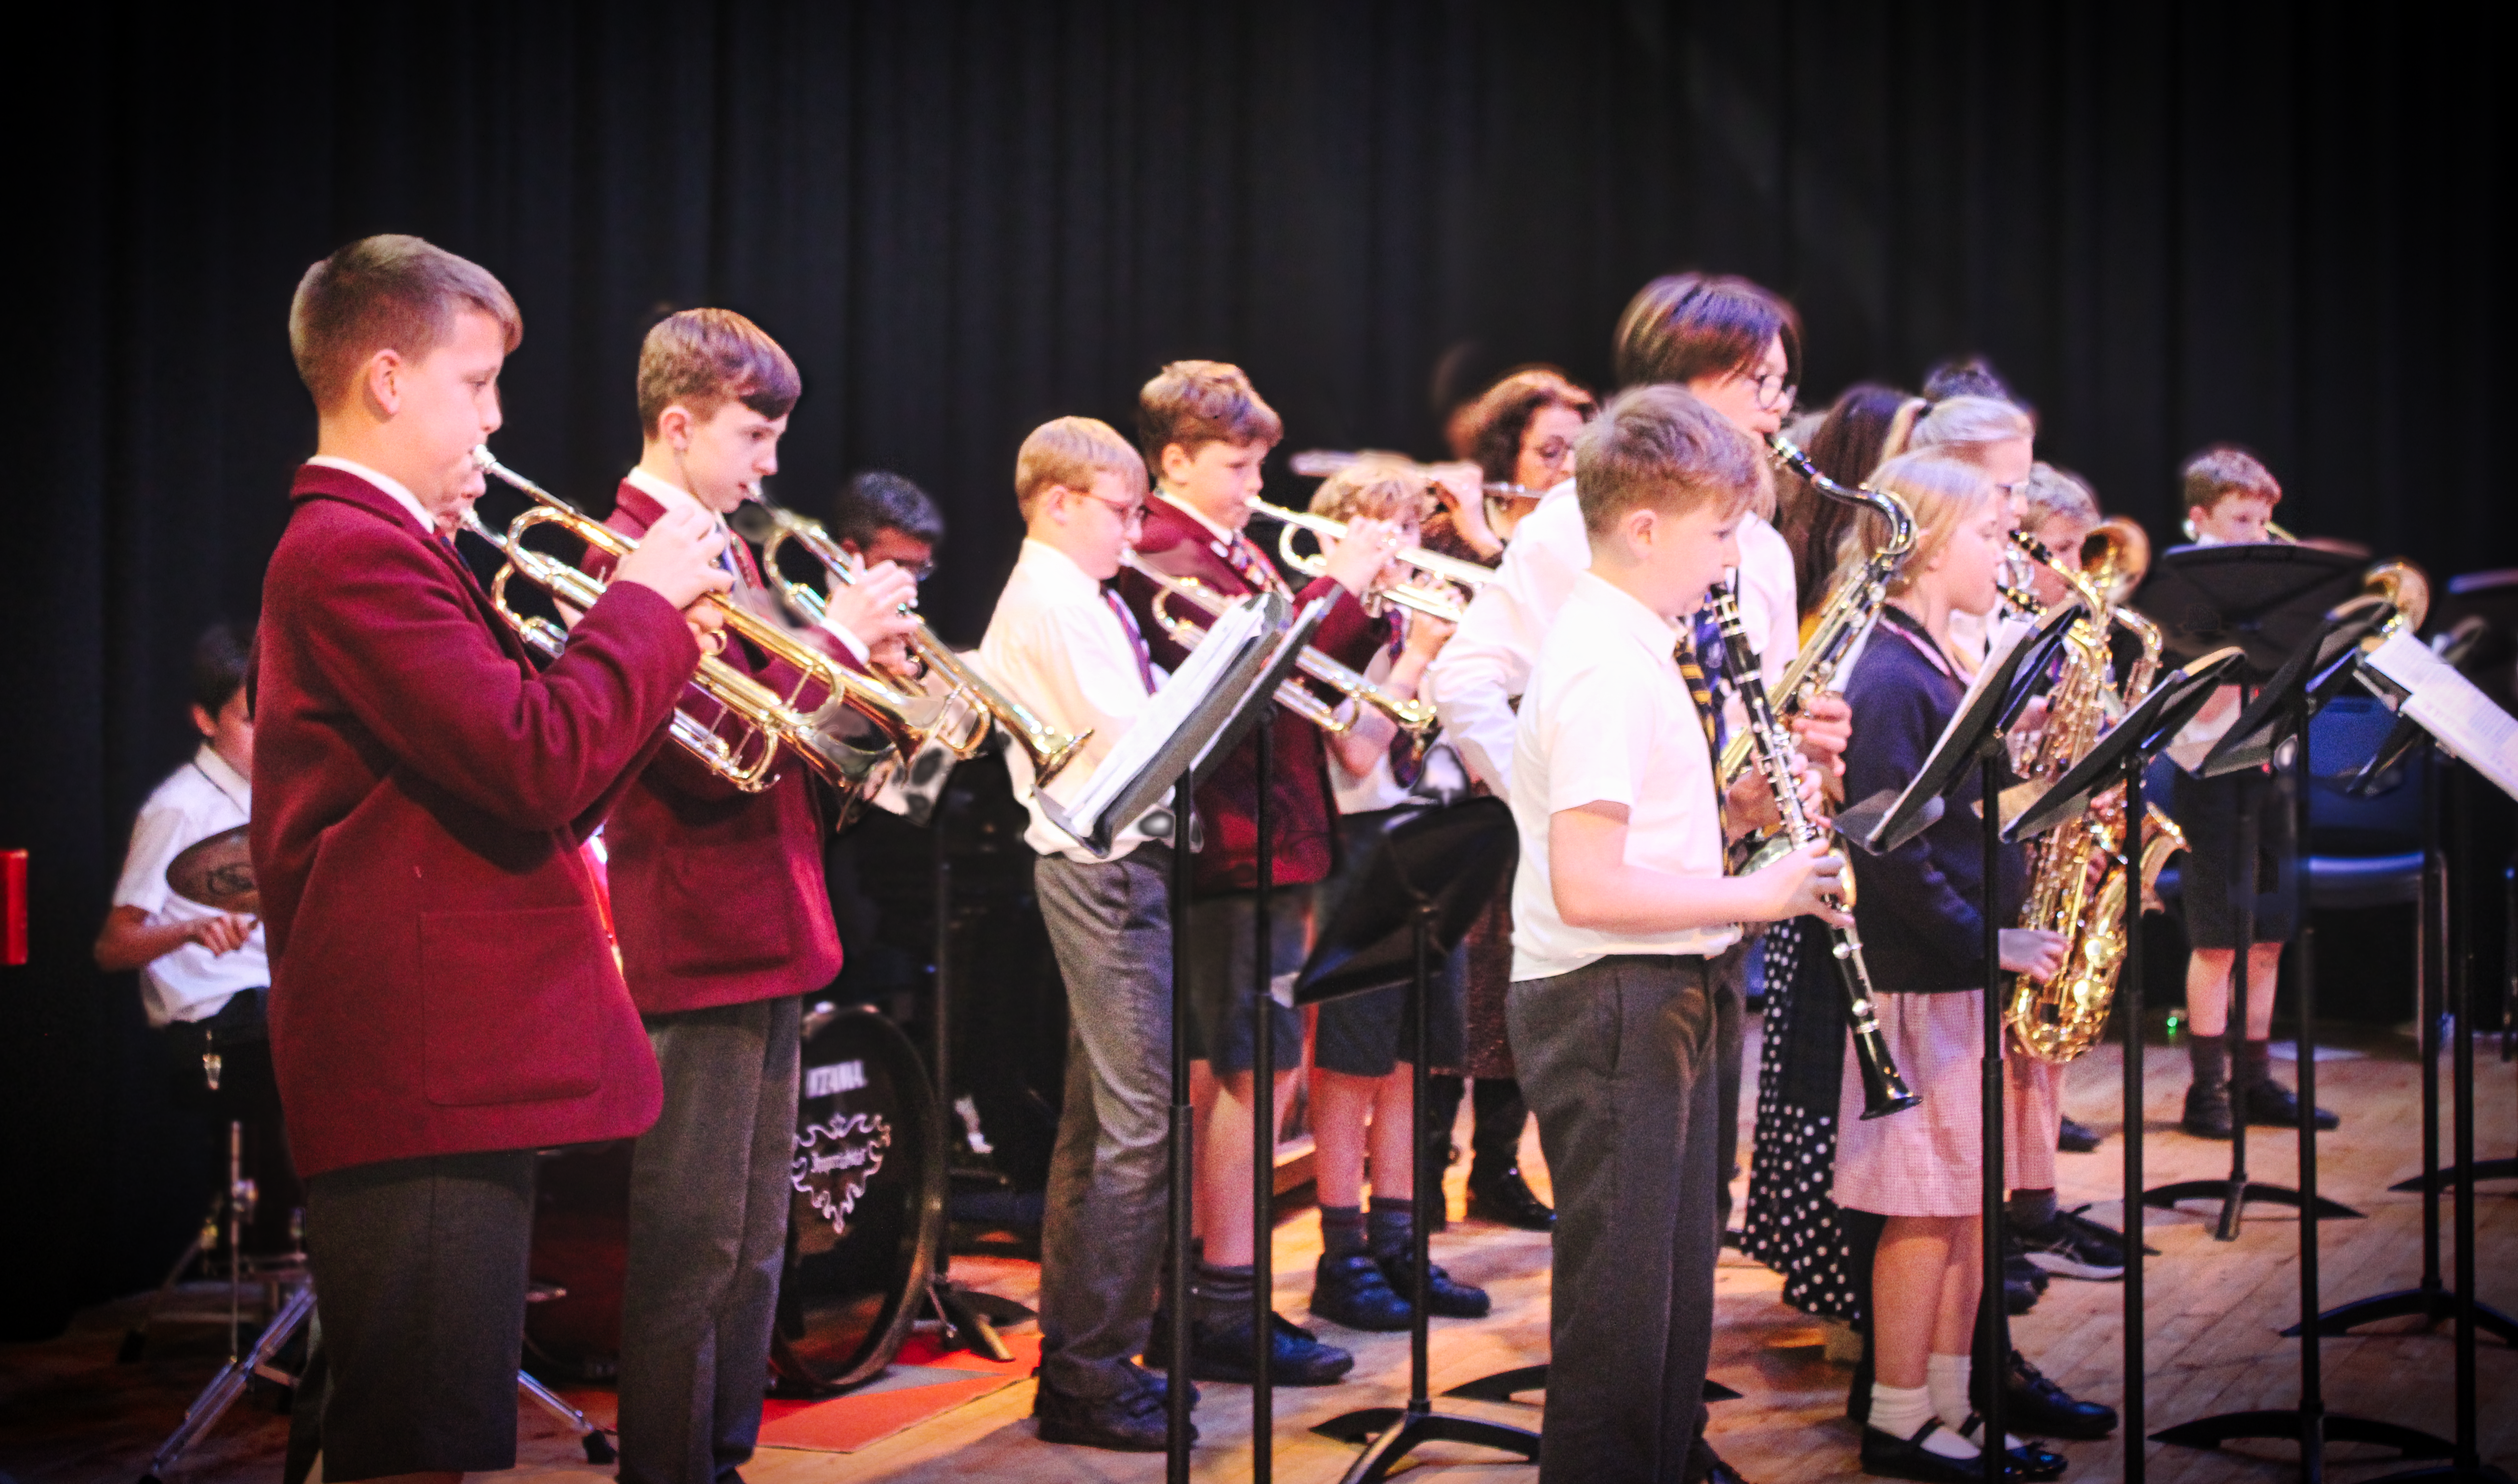 Beechwood Wind Band Pupils playing brass and woodwind instruments